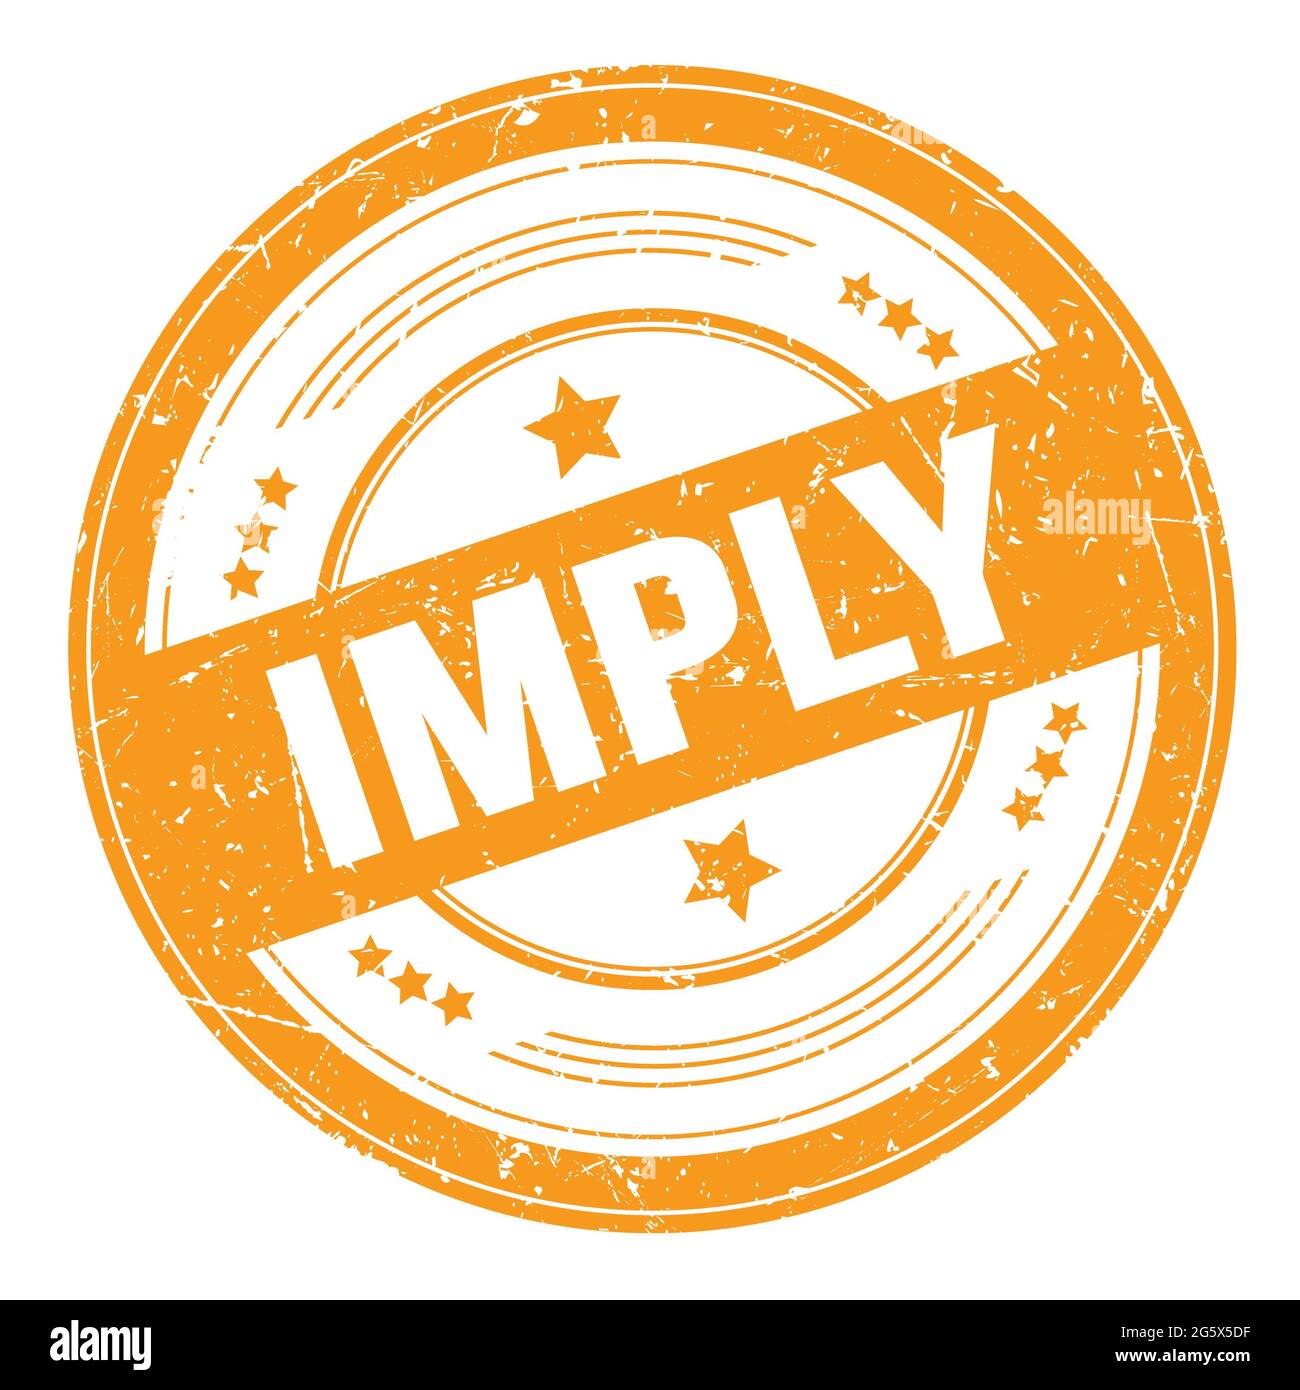 IMPLY text on orange round grungy texture stamp. Stock Photo